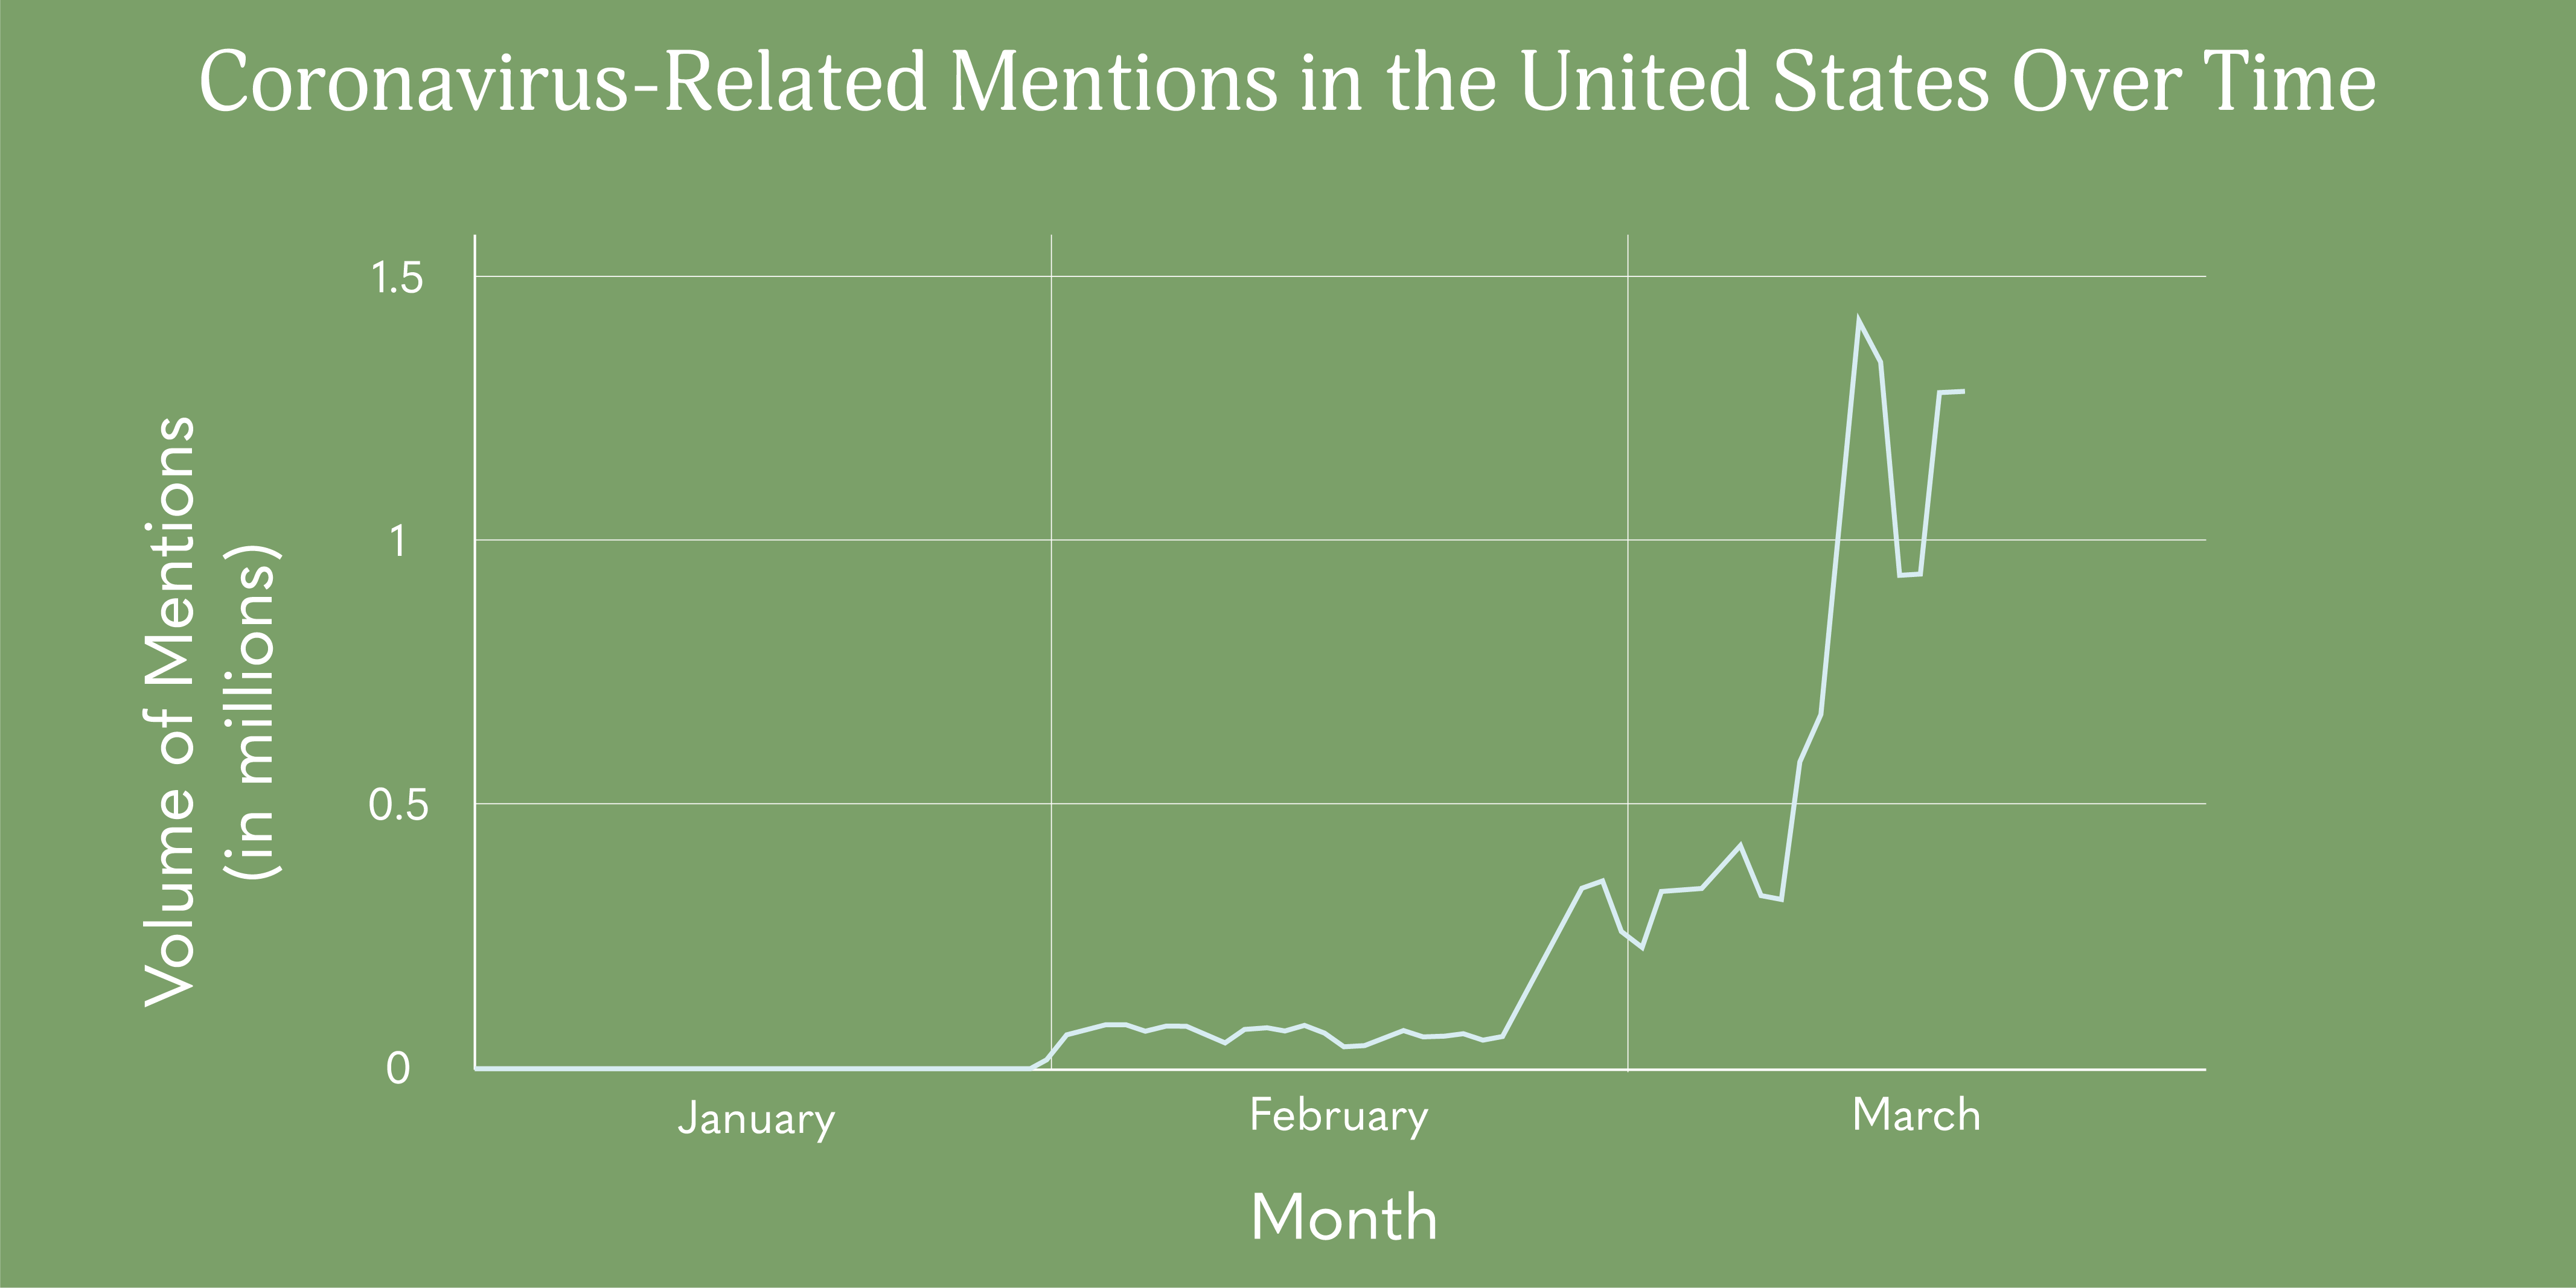 chart of coronavirus-related mentions in the U.S. over time